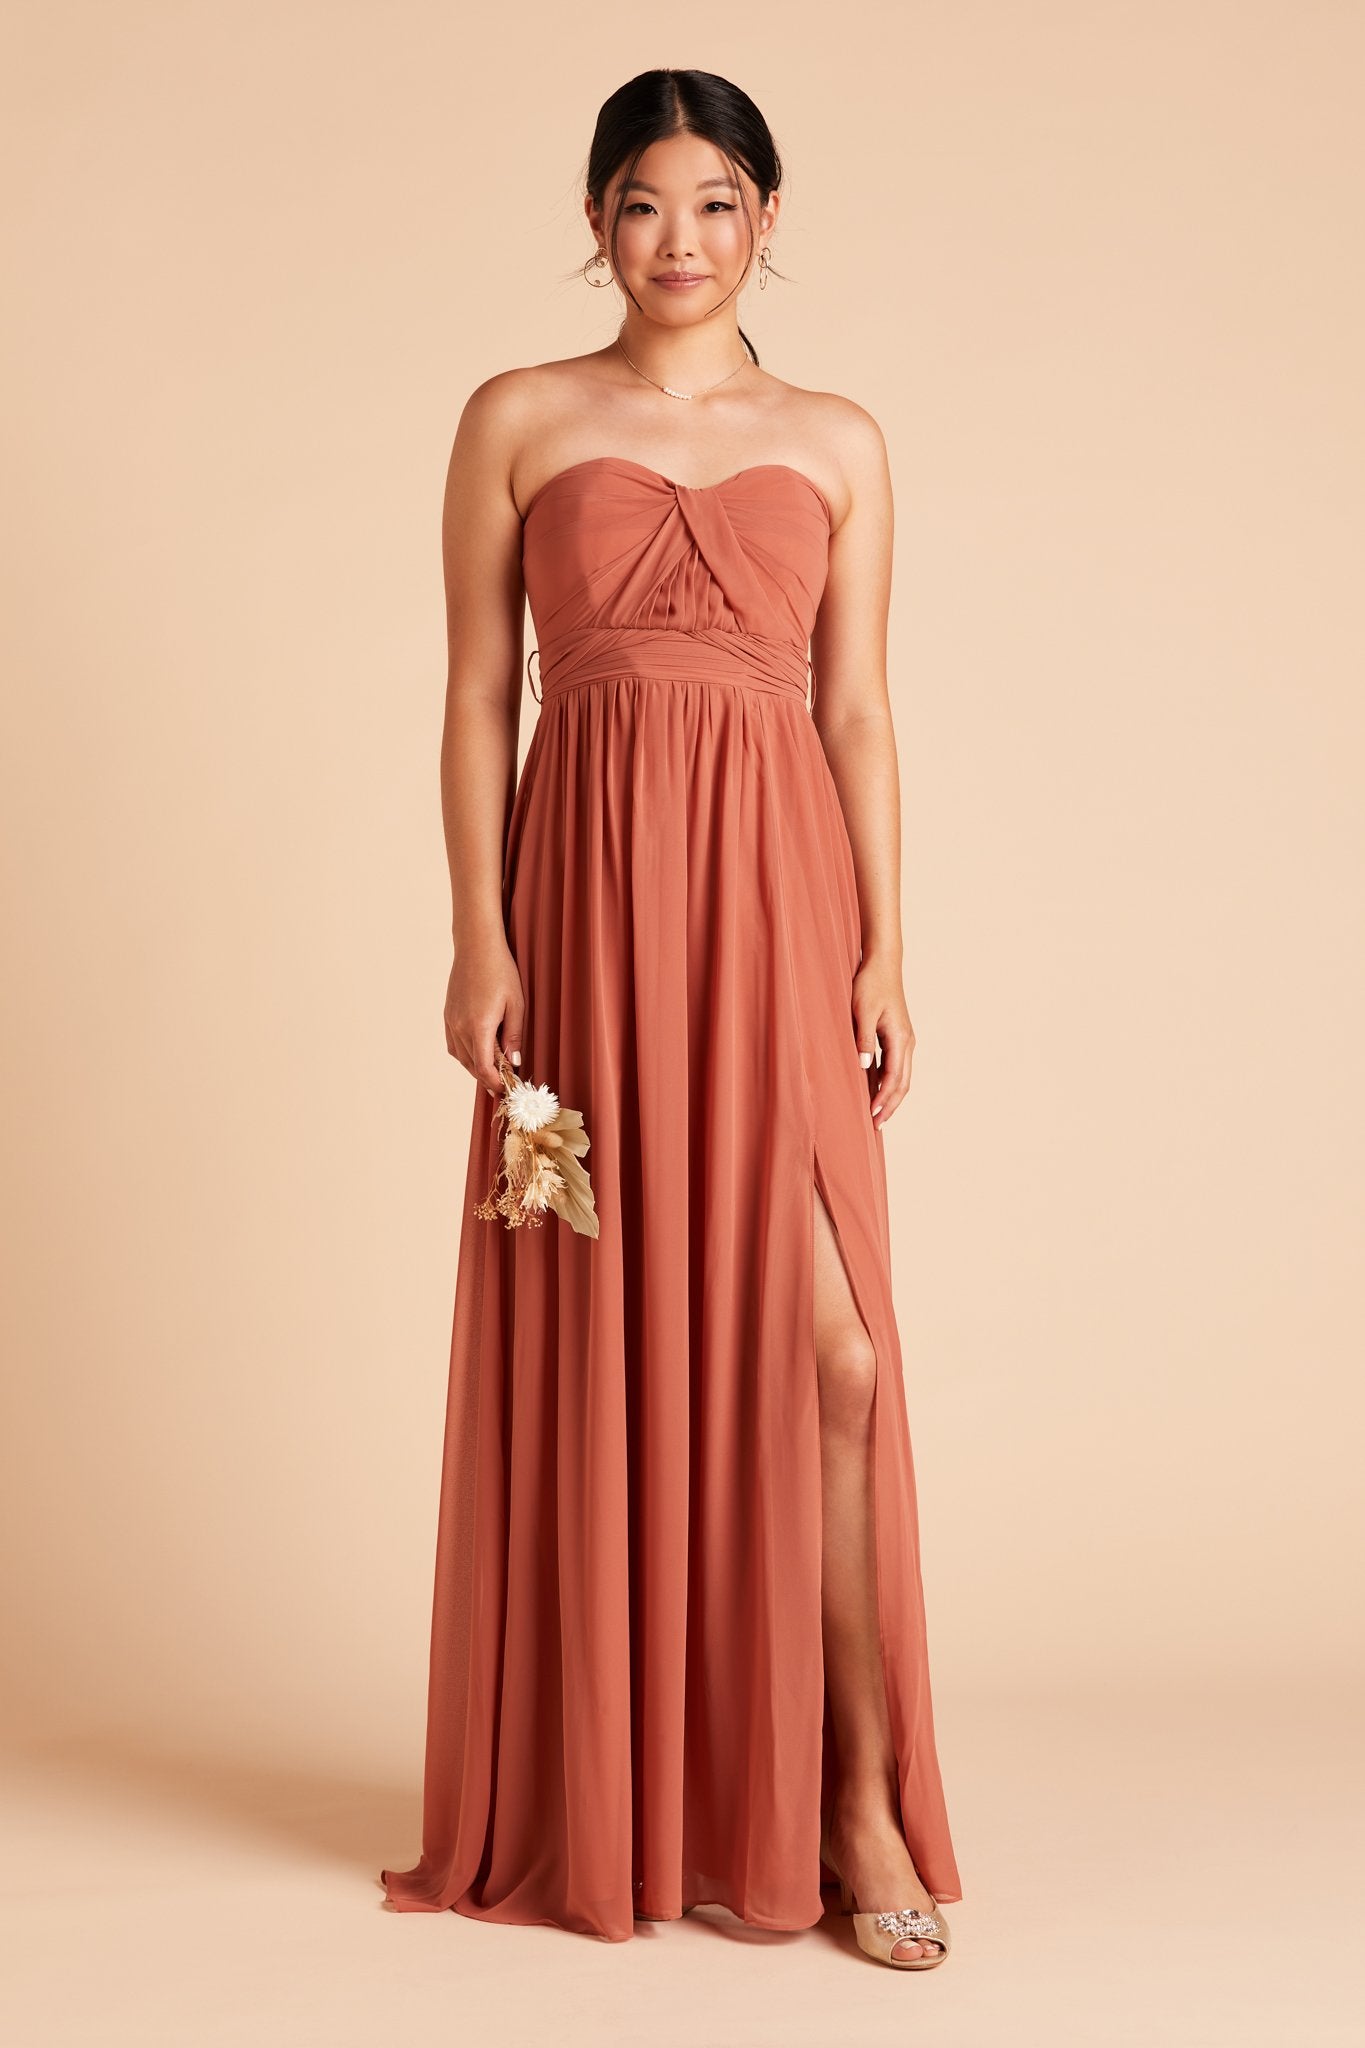 Grace convertible bridesmaid dress with slit  in terracotta orange chiffon by Birdy Grey, front view